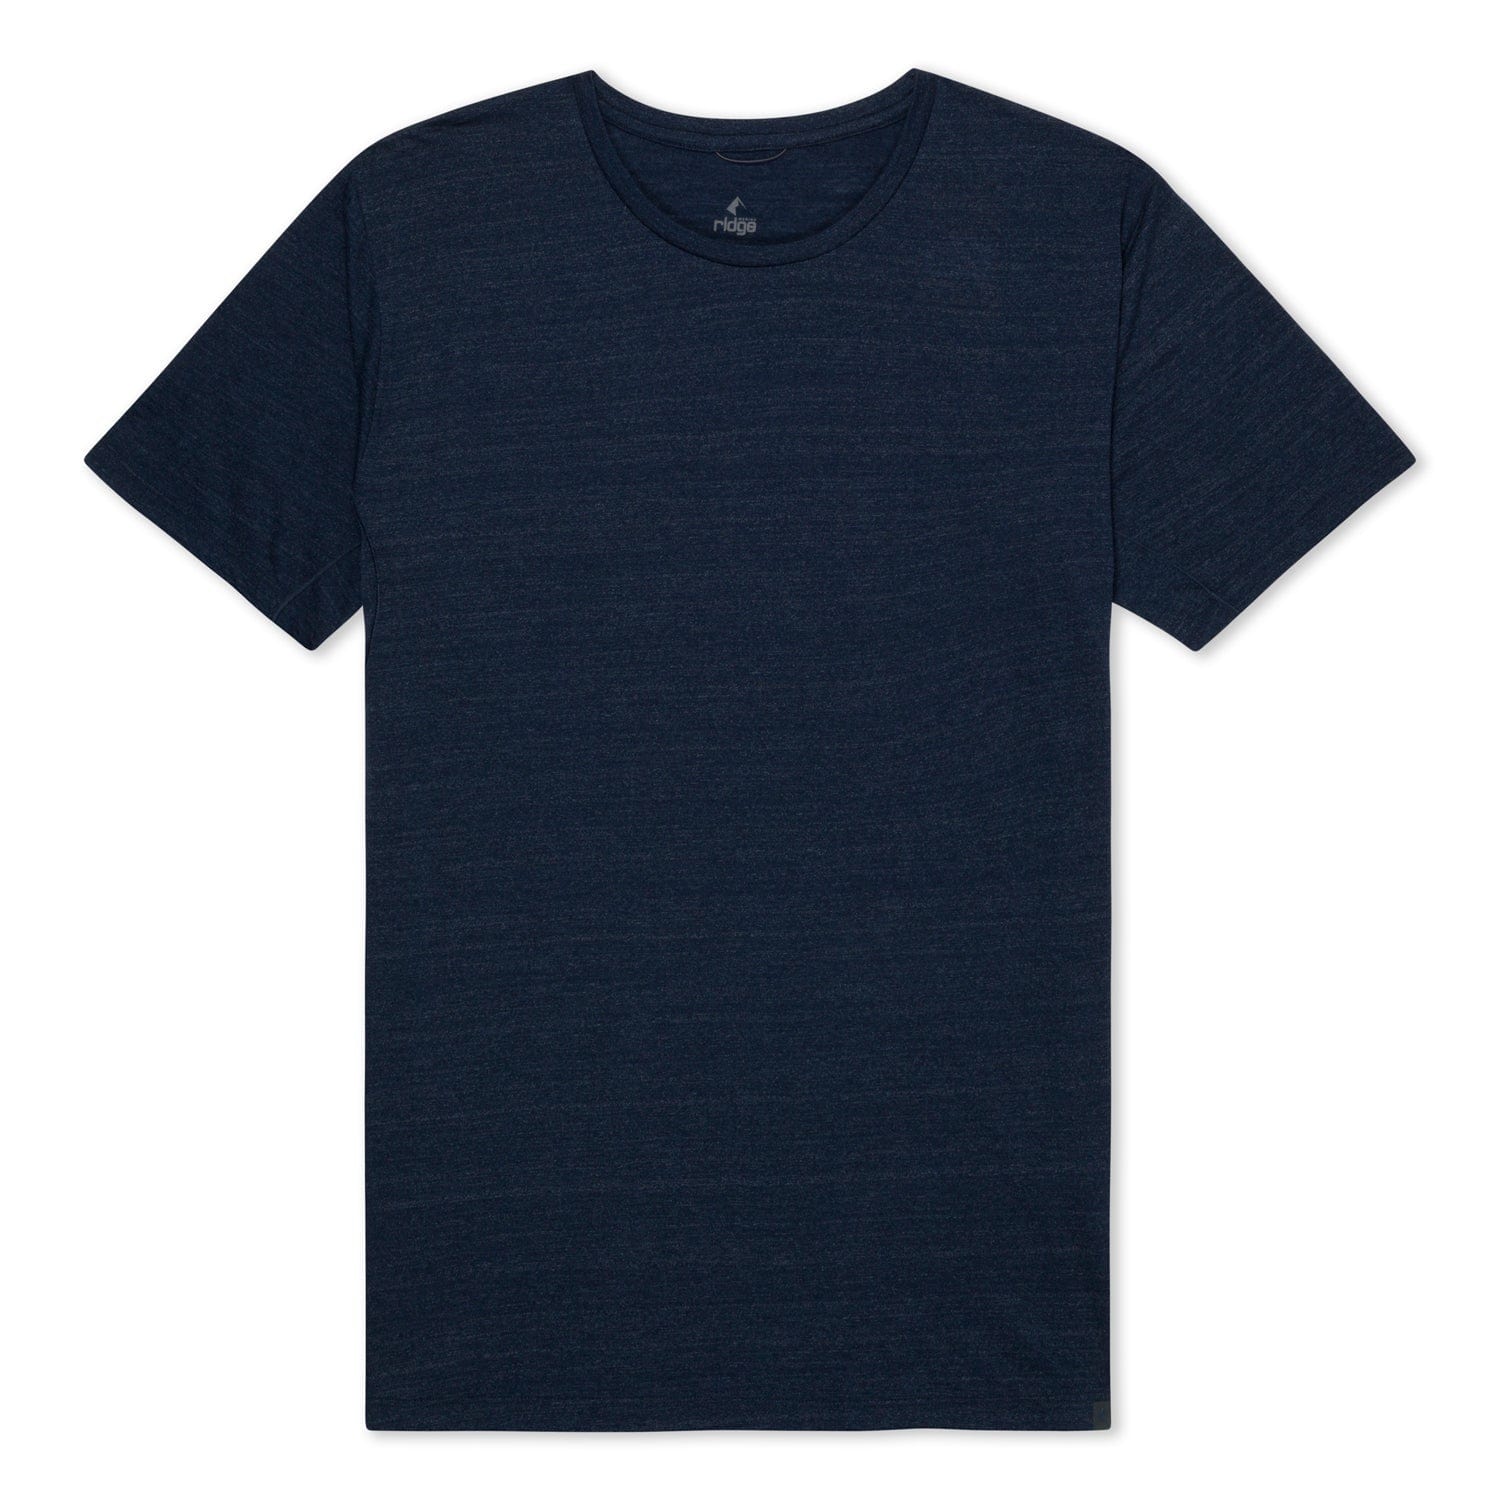 Outerspace Heather Pursuit Merino Tee